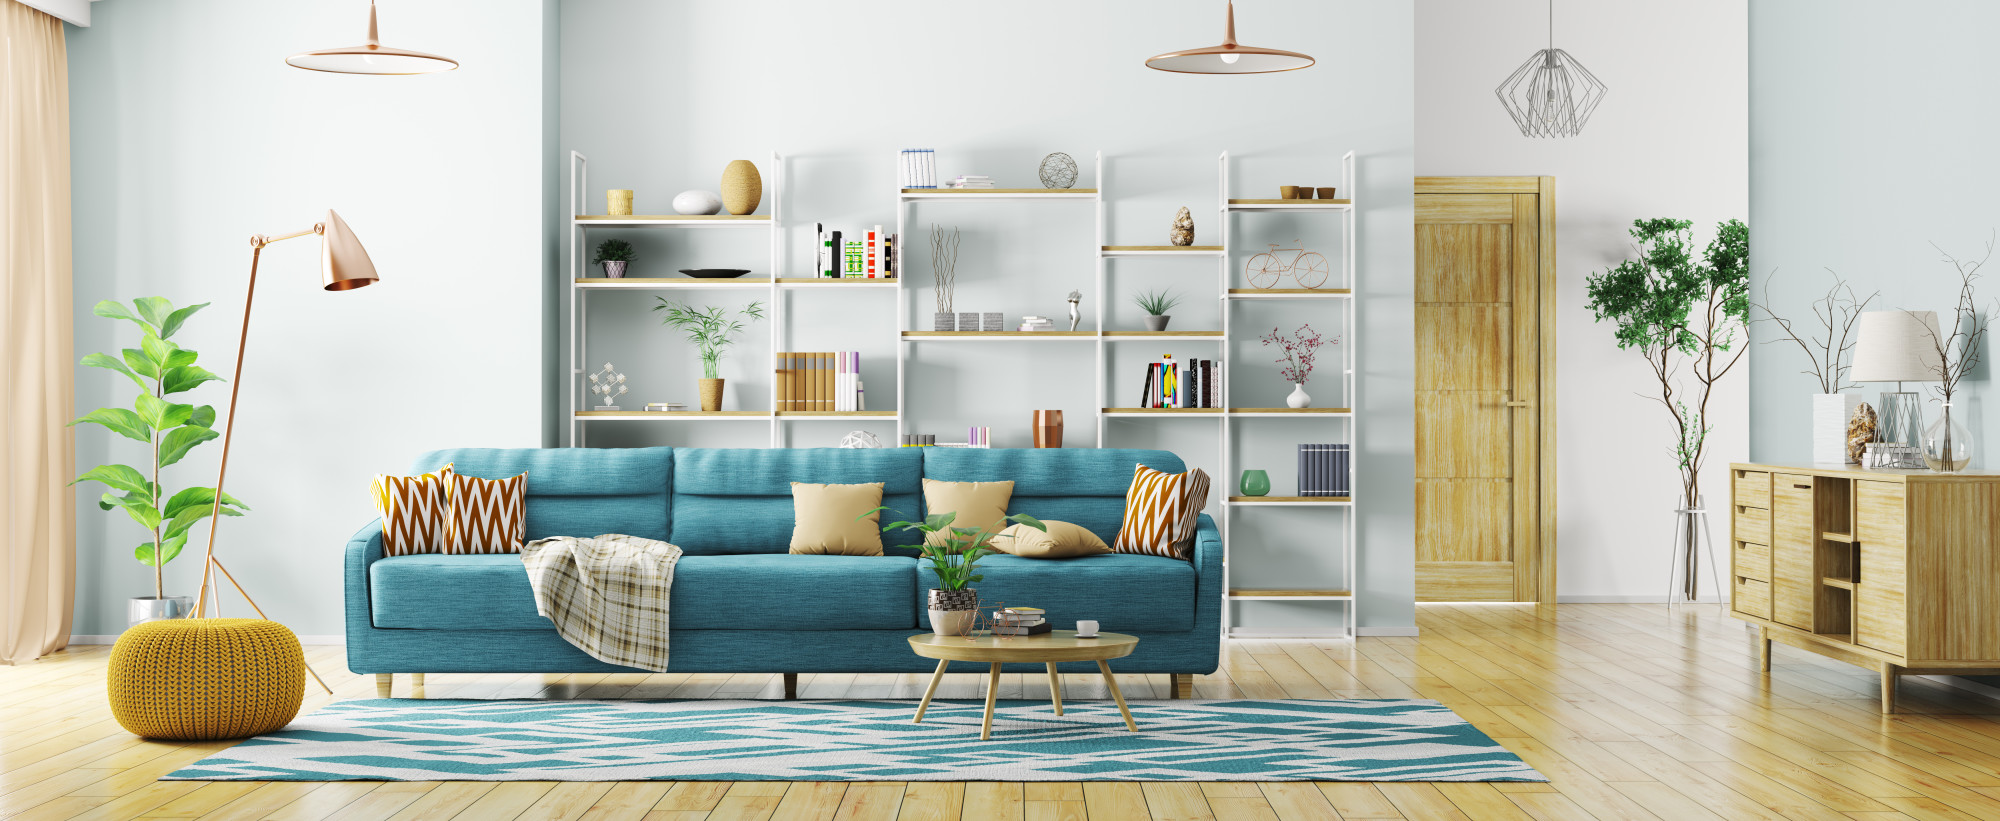 Explore 6 Simple Steps For Adorning Your Living Room